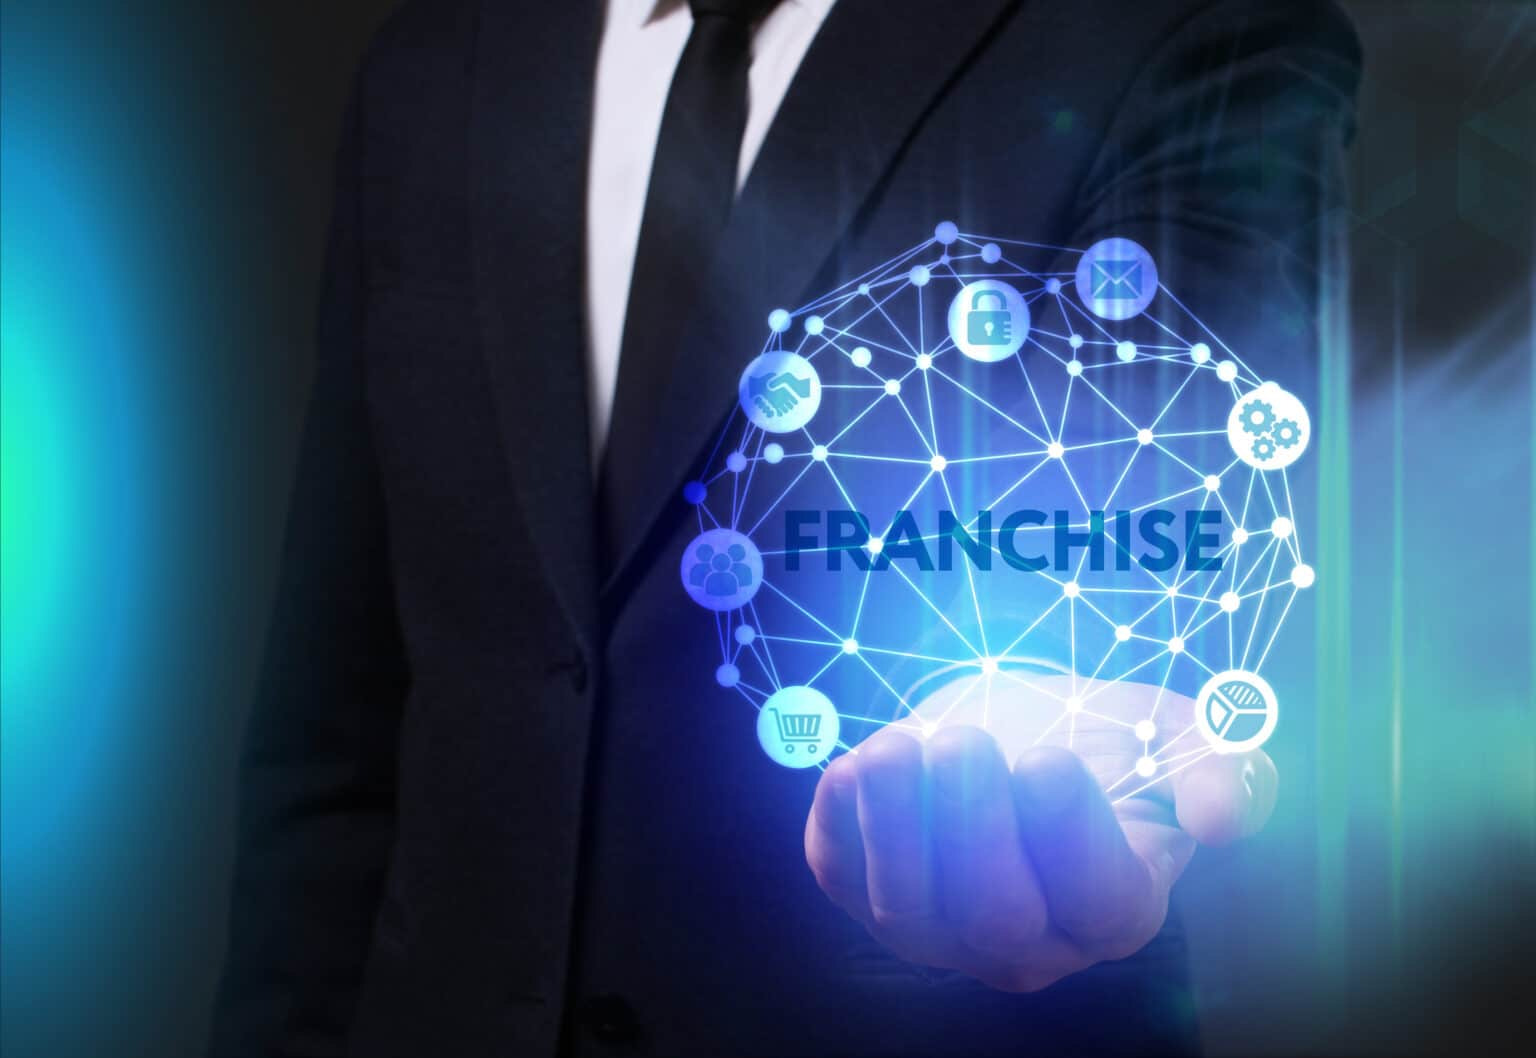 Top Trends in Franchise Marketing Agency Services